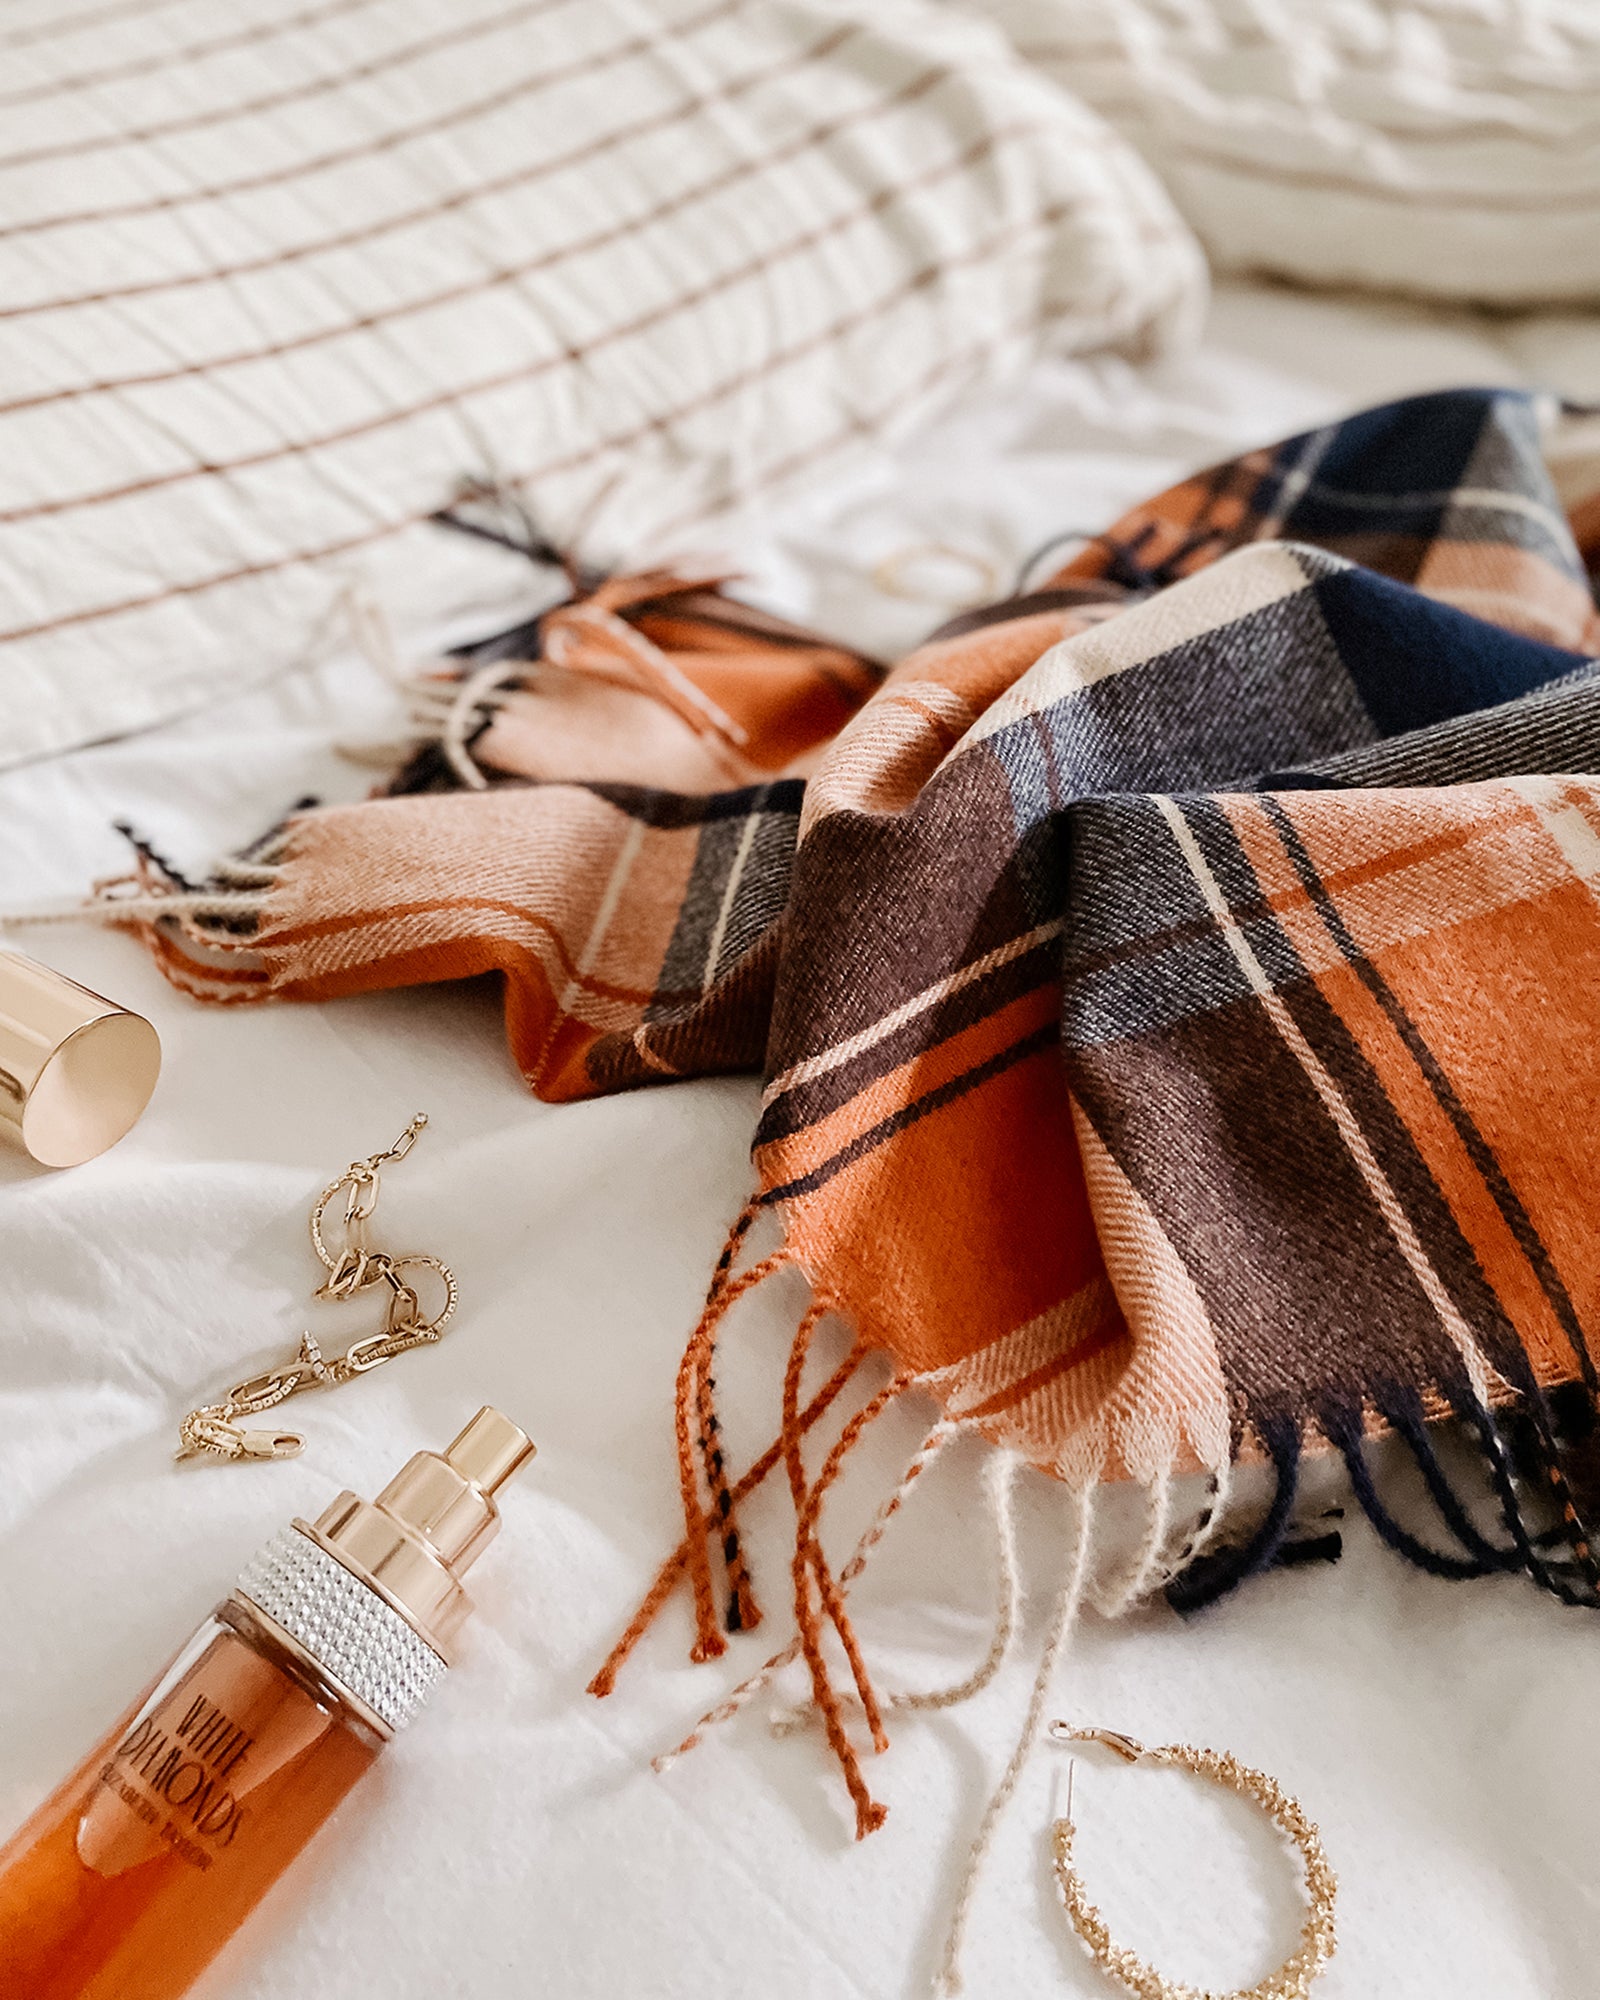 The Louenhide Glasgow Scarf is a timeless tartan pattern in gorgeous winter colourways.